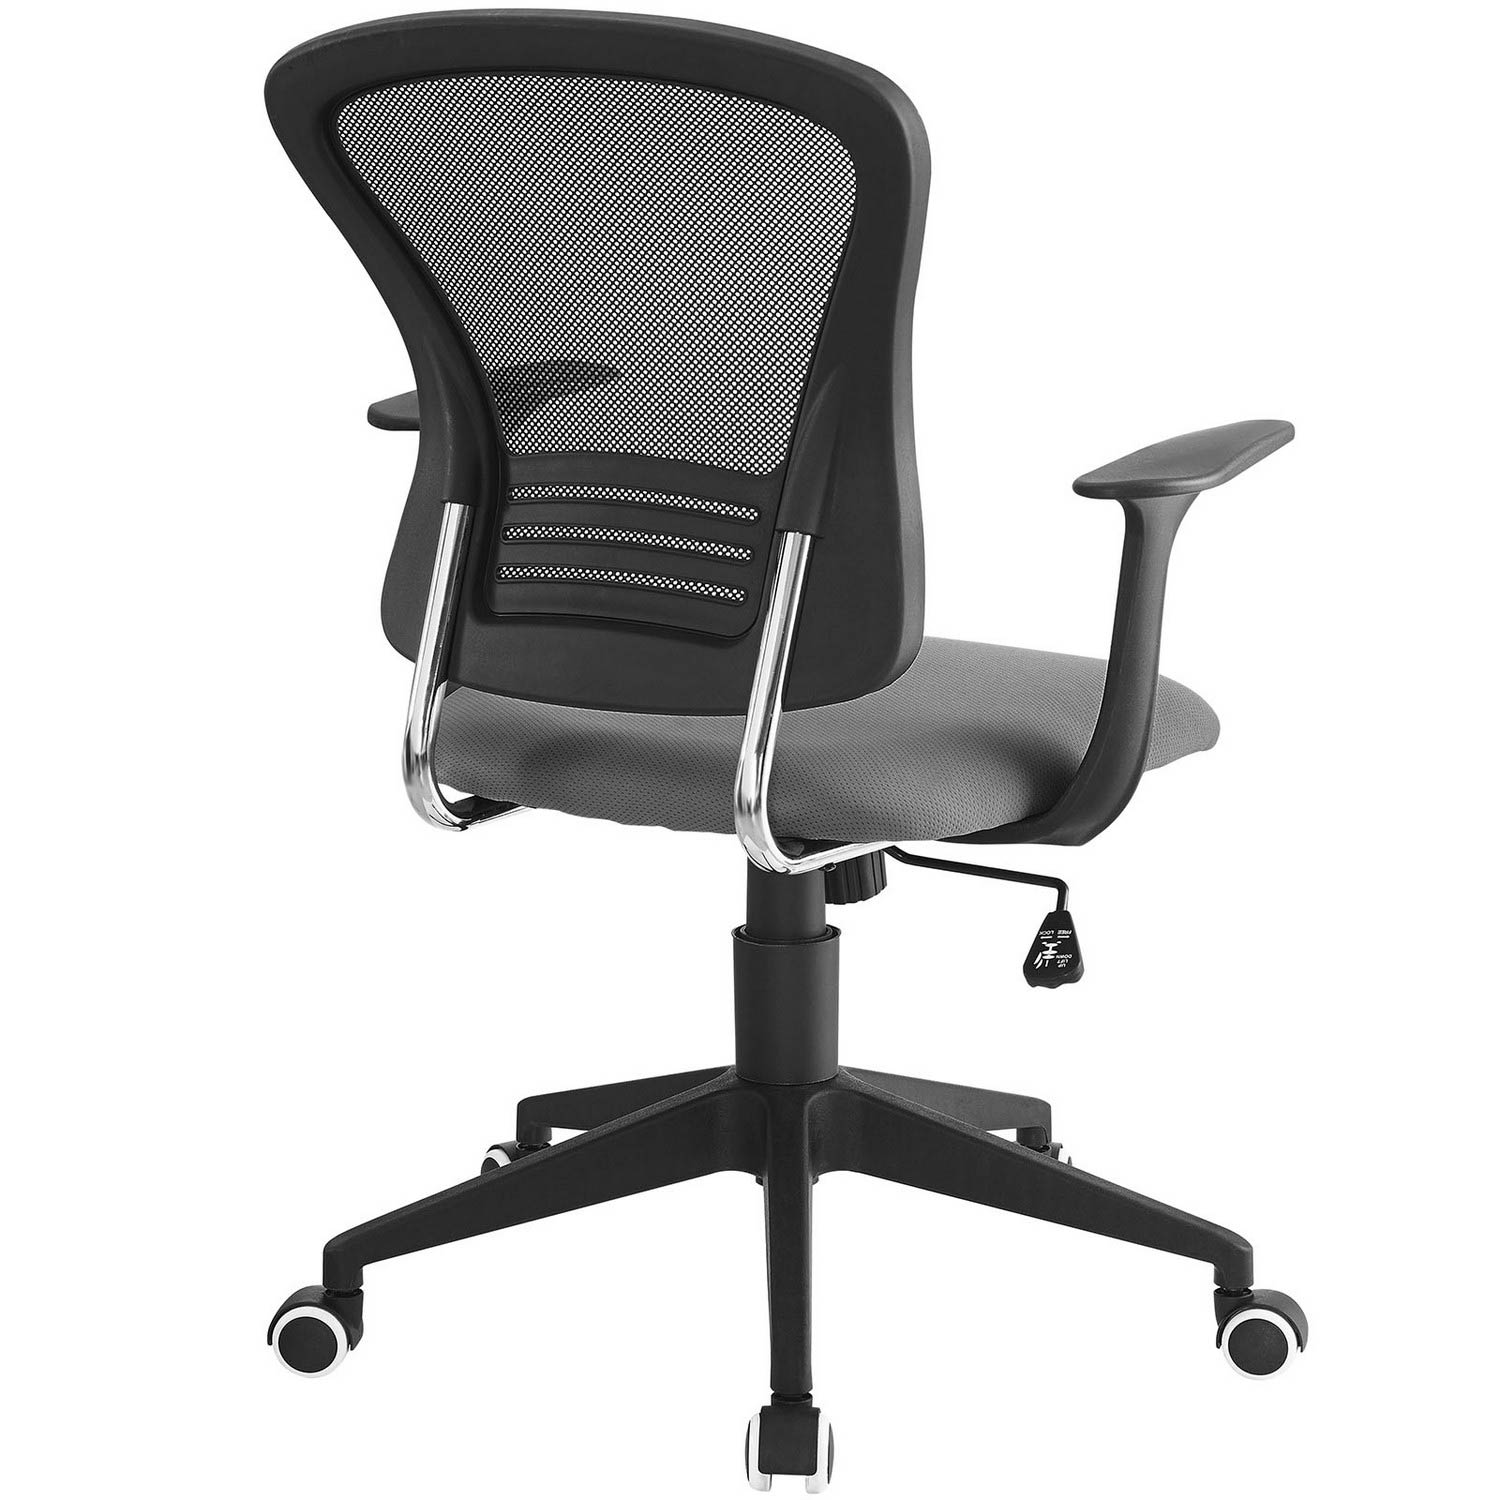 Modway Poise Office Chair - Gray